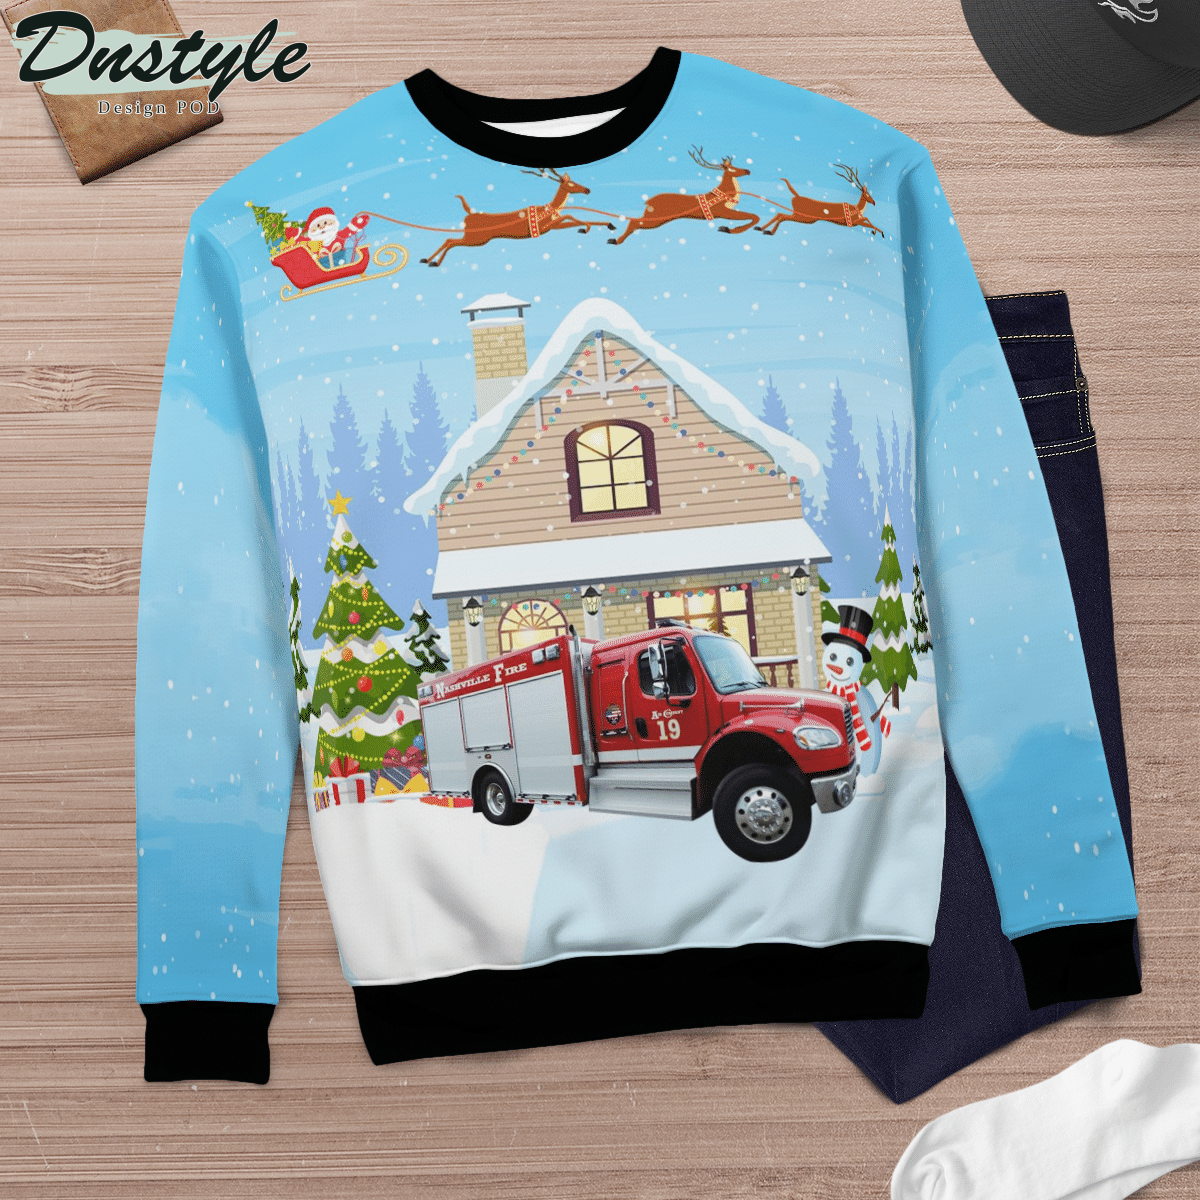 Tennessee Nashville Fire Department Rescue Truck Ugly Christmas Sweater